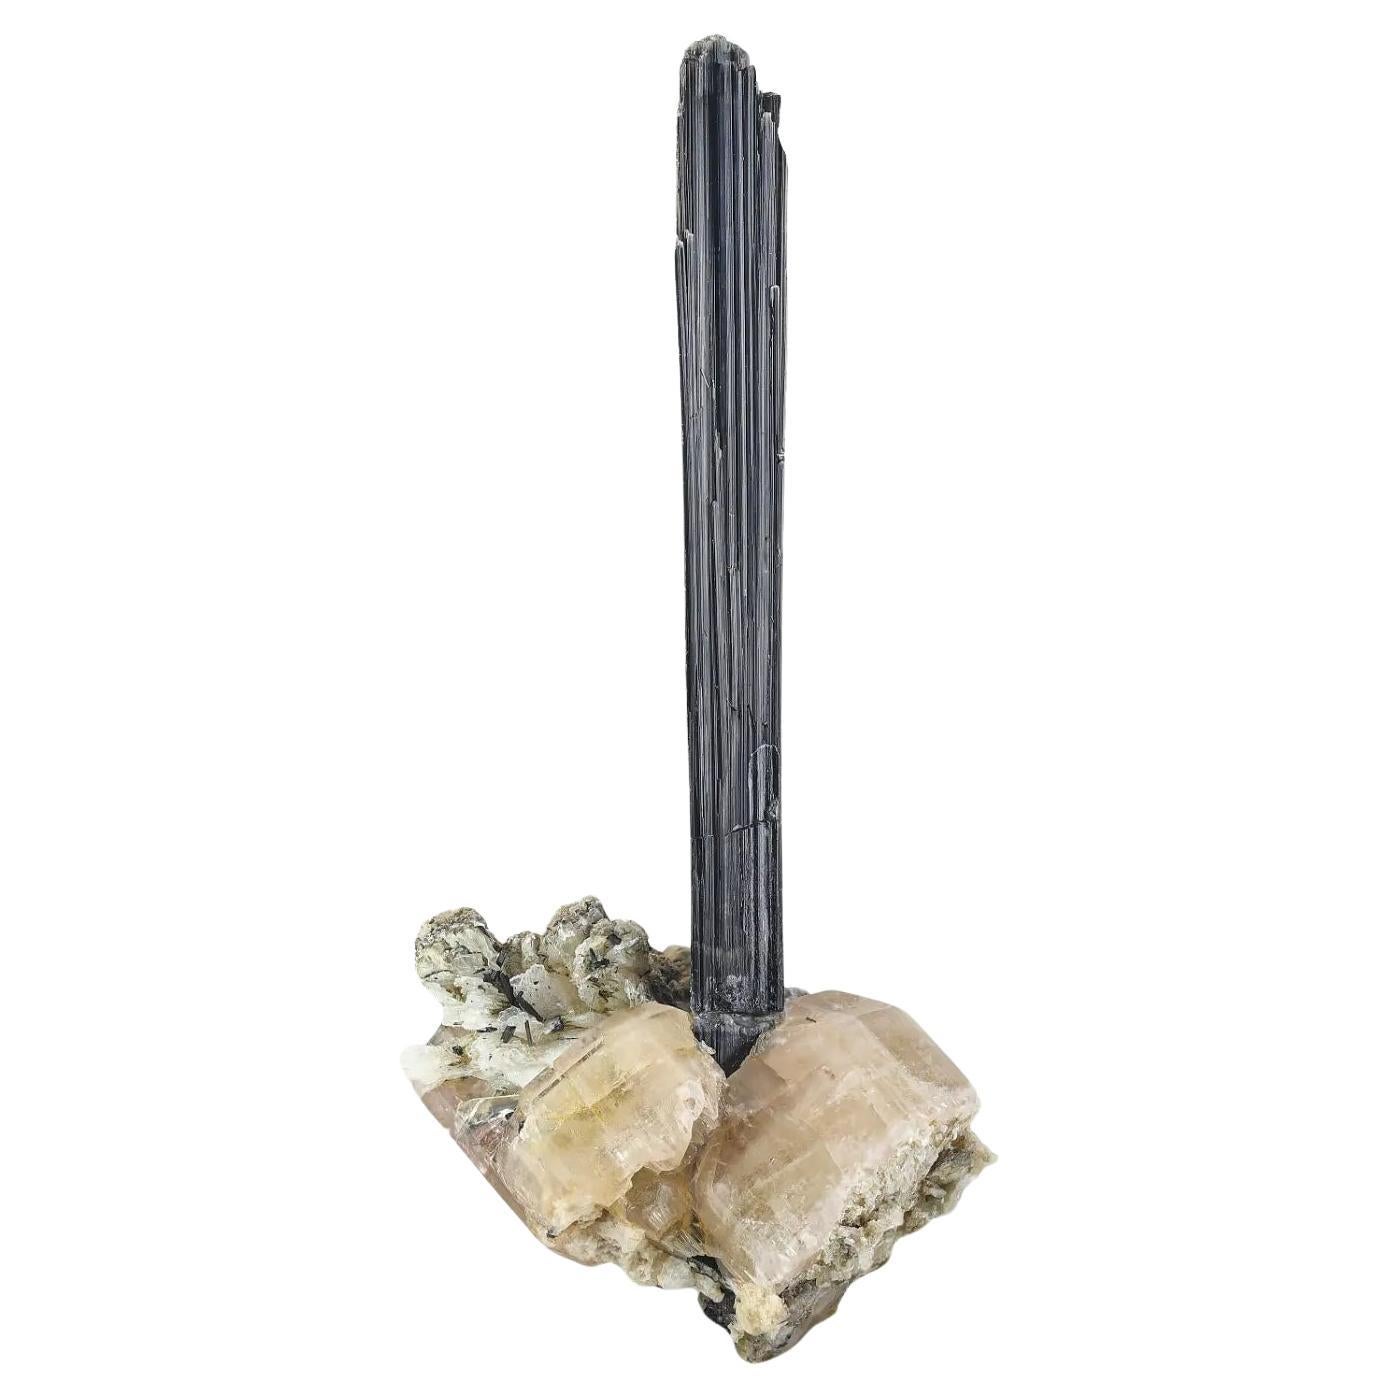 Elongated Free Standing Schorl Black Tourmaline Crystal on Apatite from Pakistan For Sale